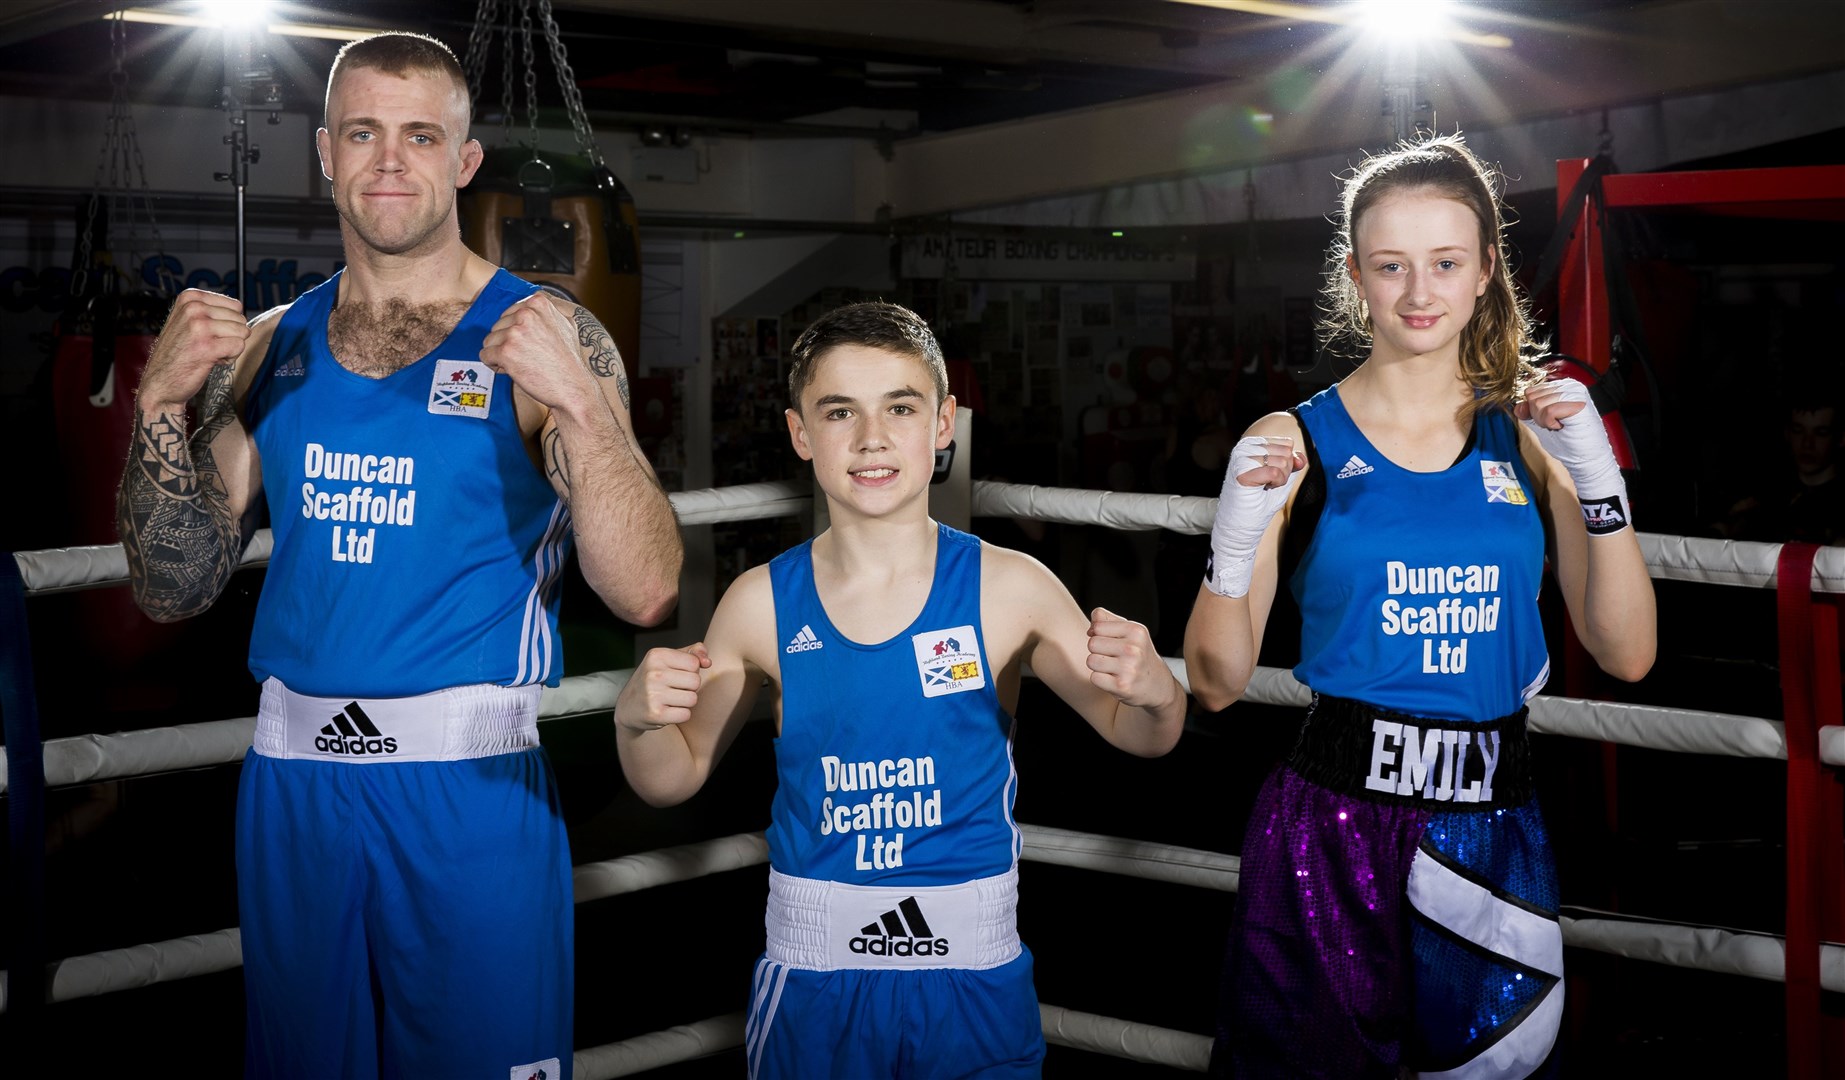 Jamie Macdonald, Ewan Gliniecki and Emily MacDonald will be boxing at the Hull International box Cup for Highland Boxing Academy this weekend. Picture: David Rothnie